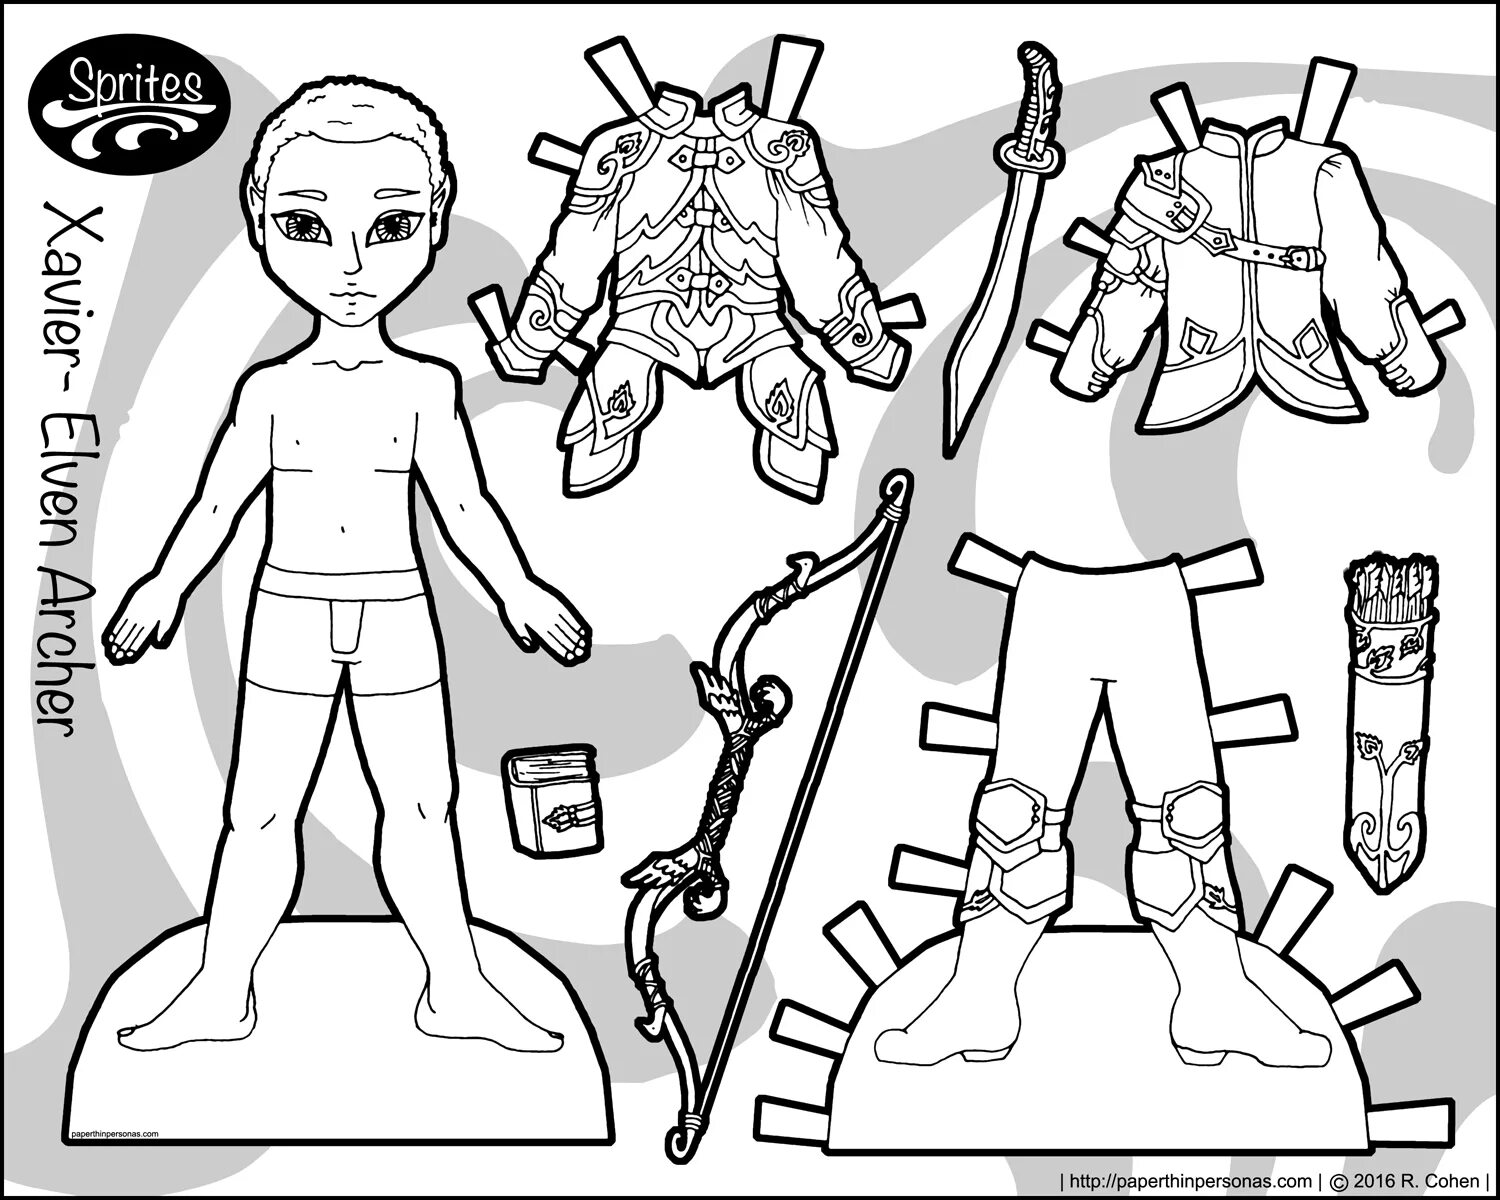 Paper doll boy with cutout clothes #19